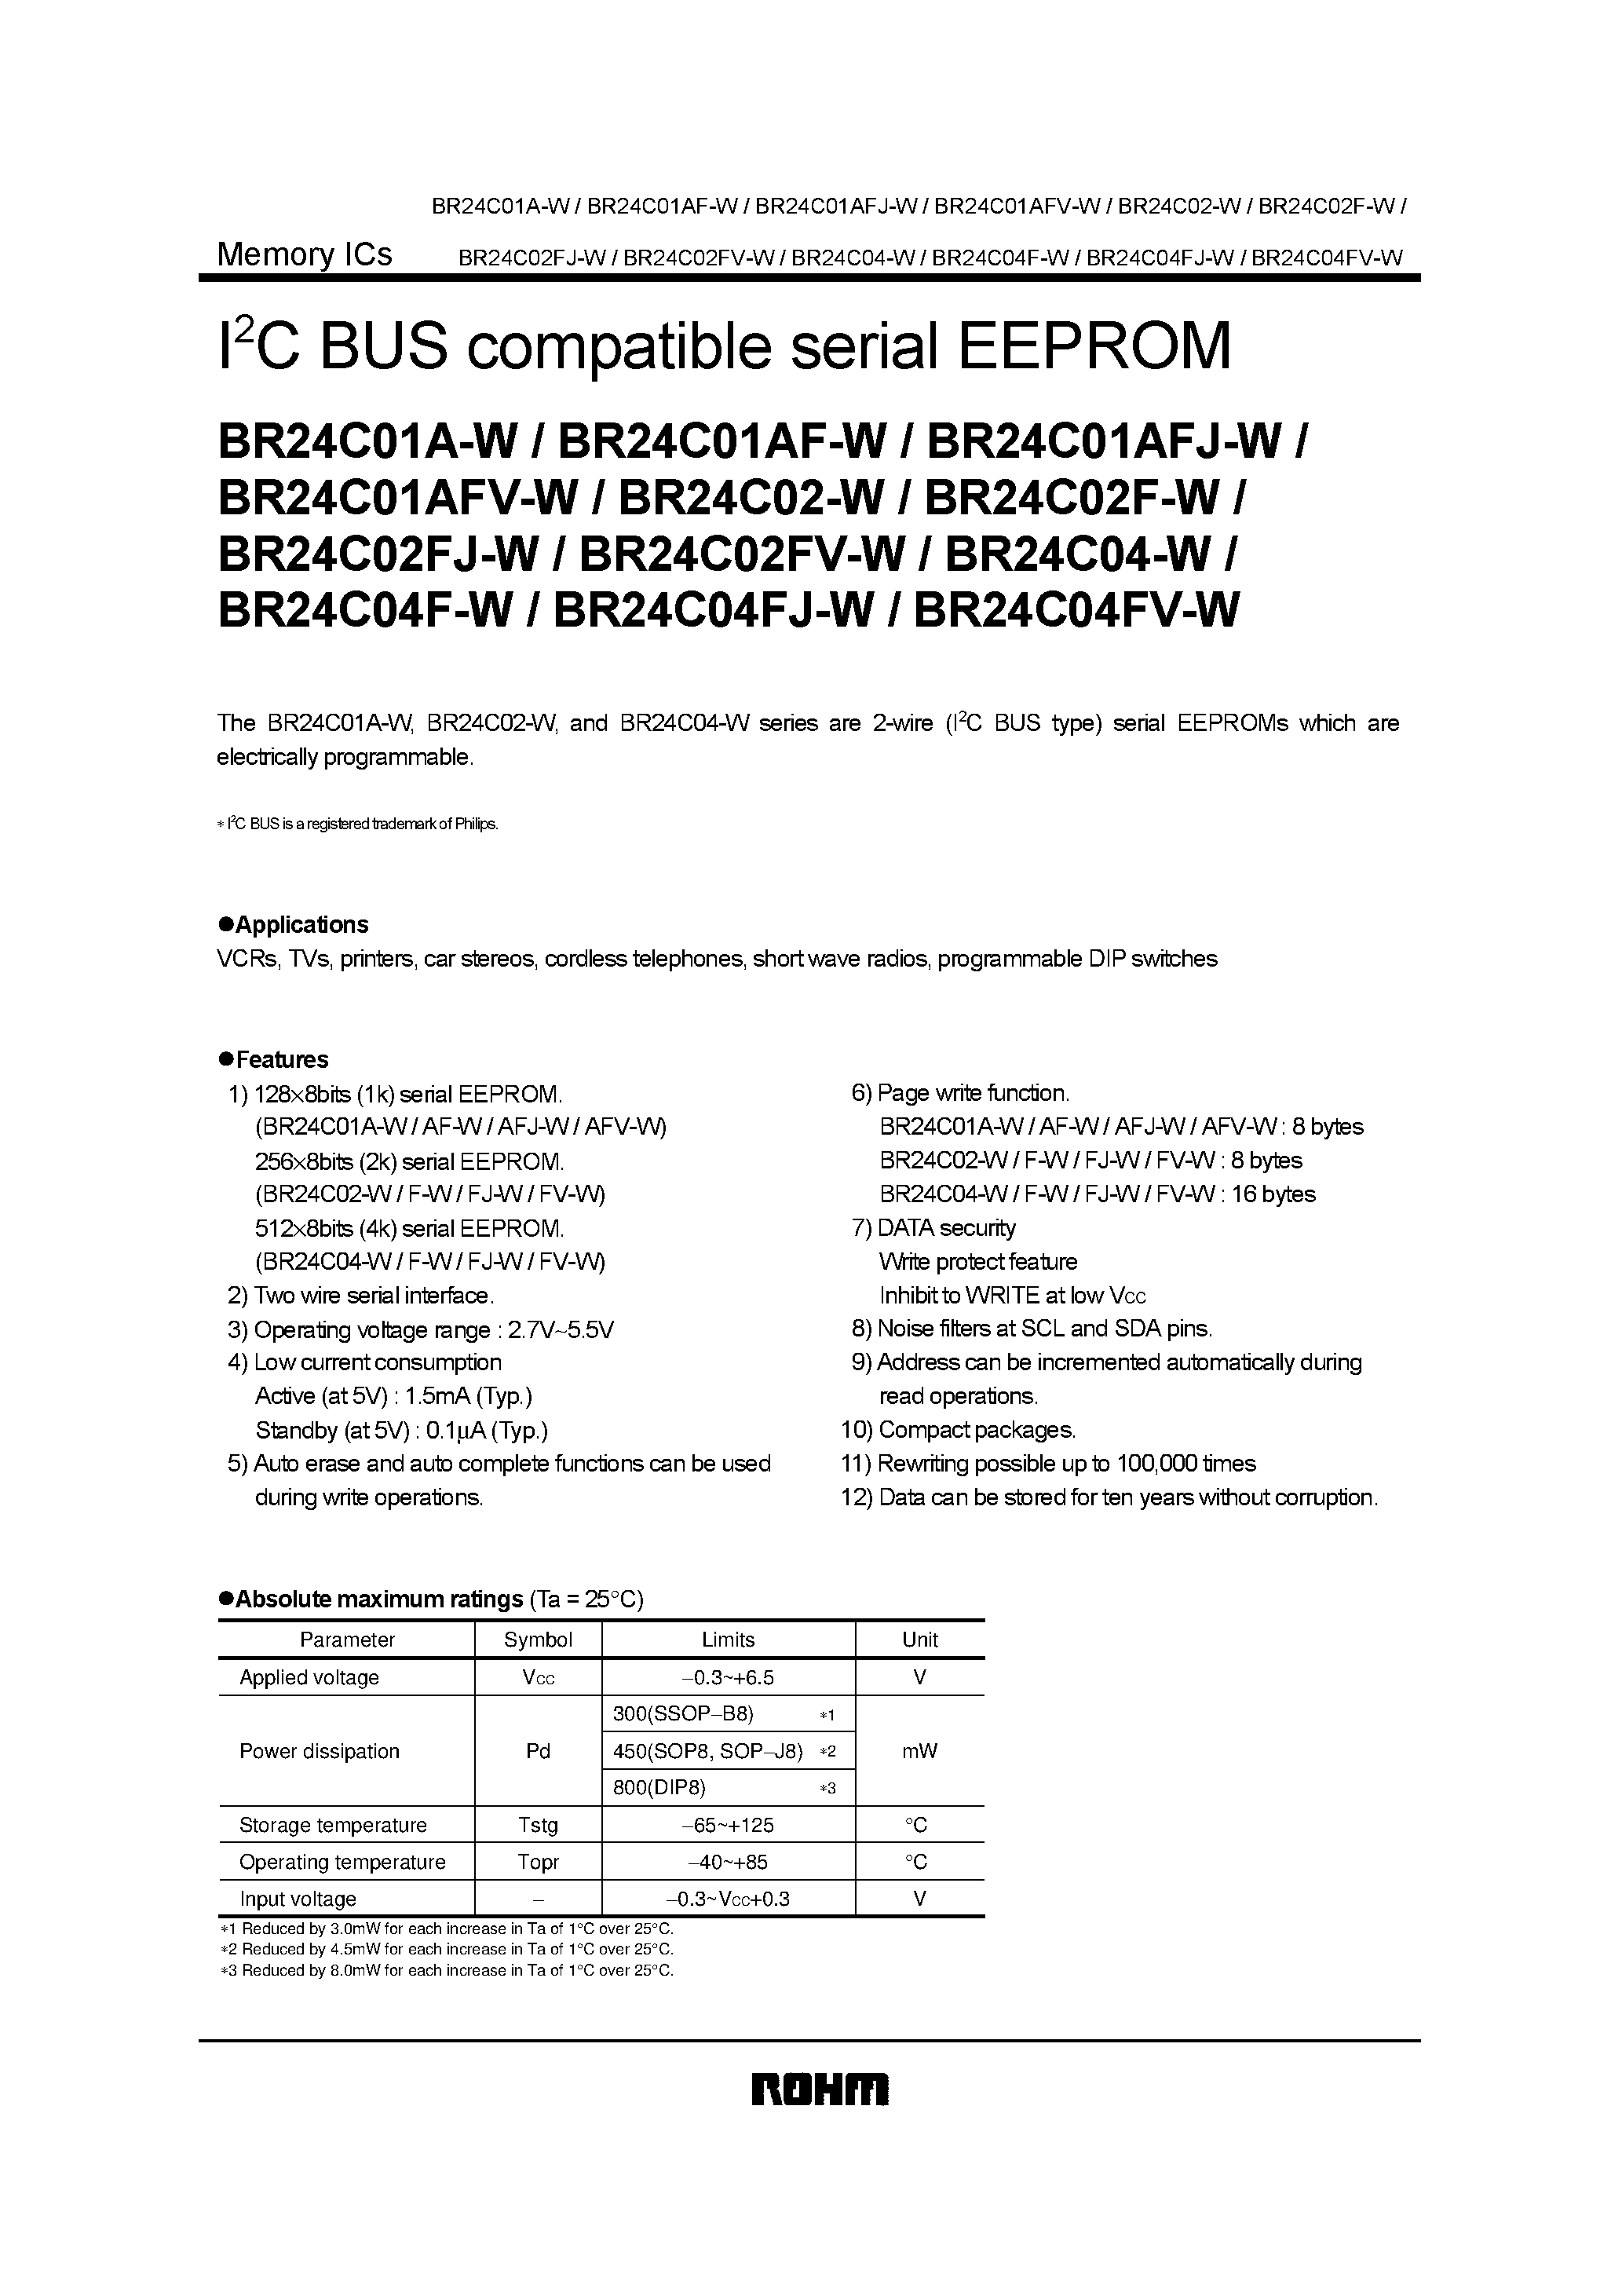 Datasheet BR24C04FJ-W - I2C BUS compatible serial EEPROM page 1